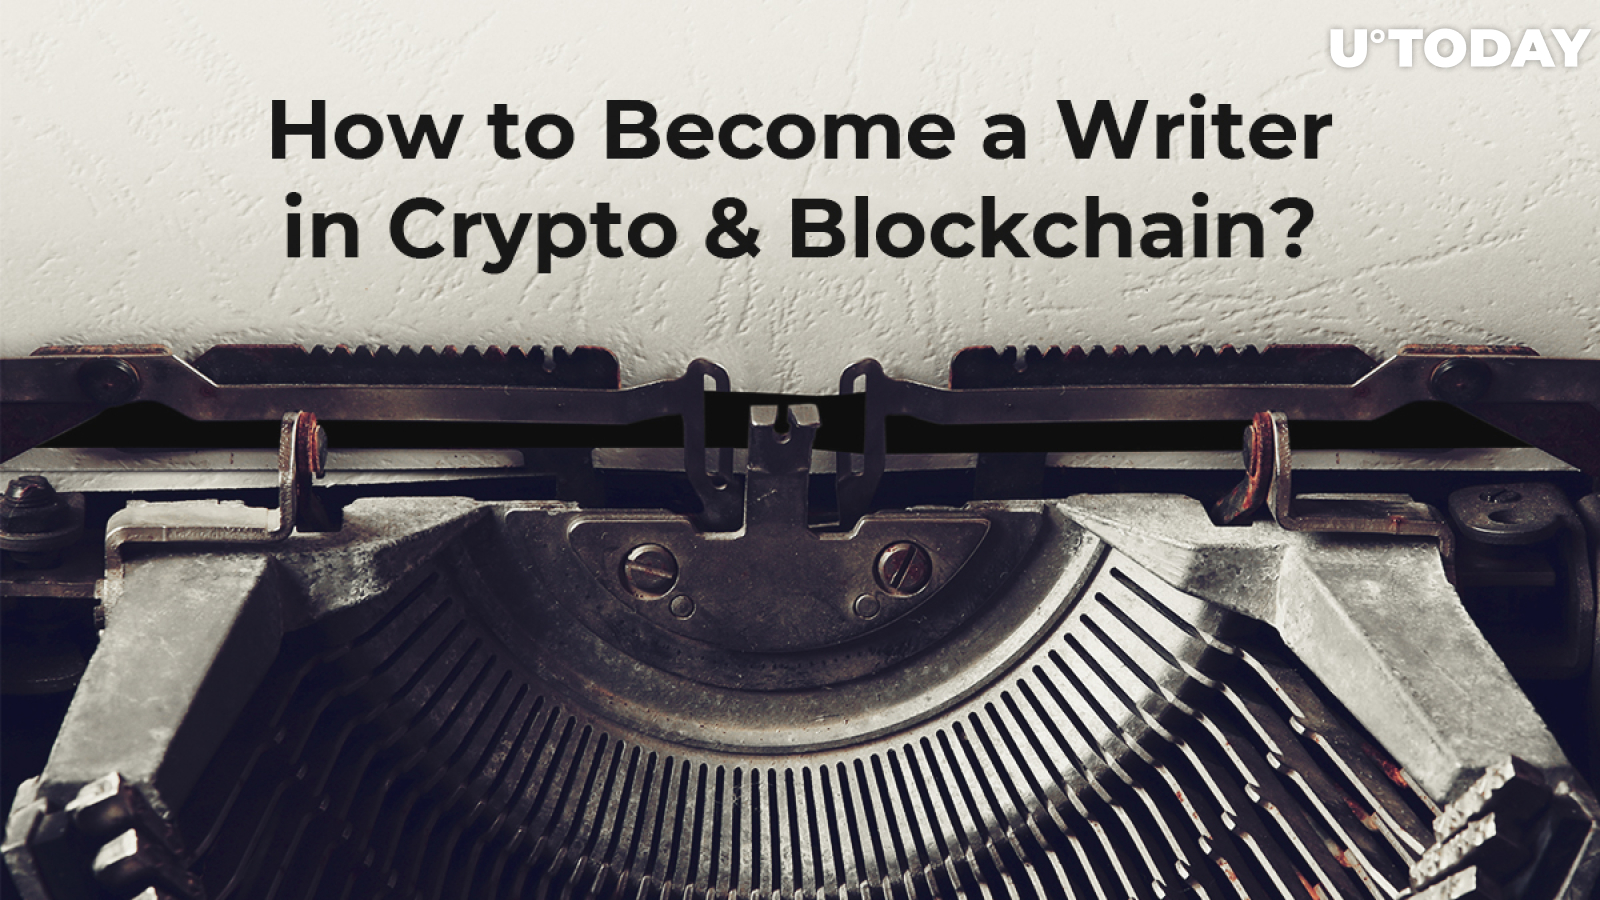 How to Become a Writer in Crypto & Blockchain?